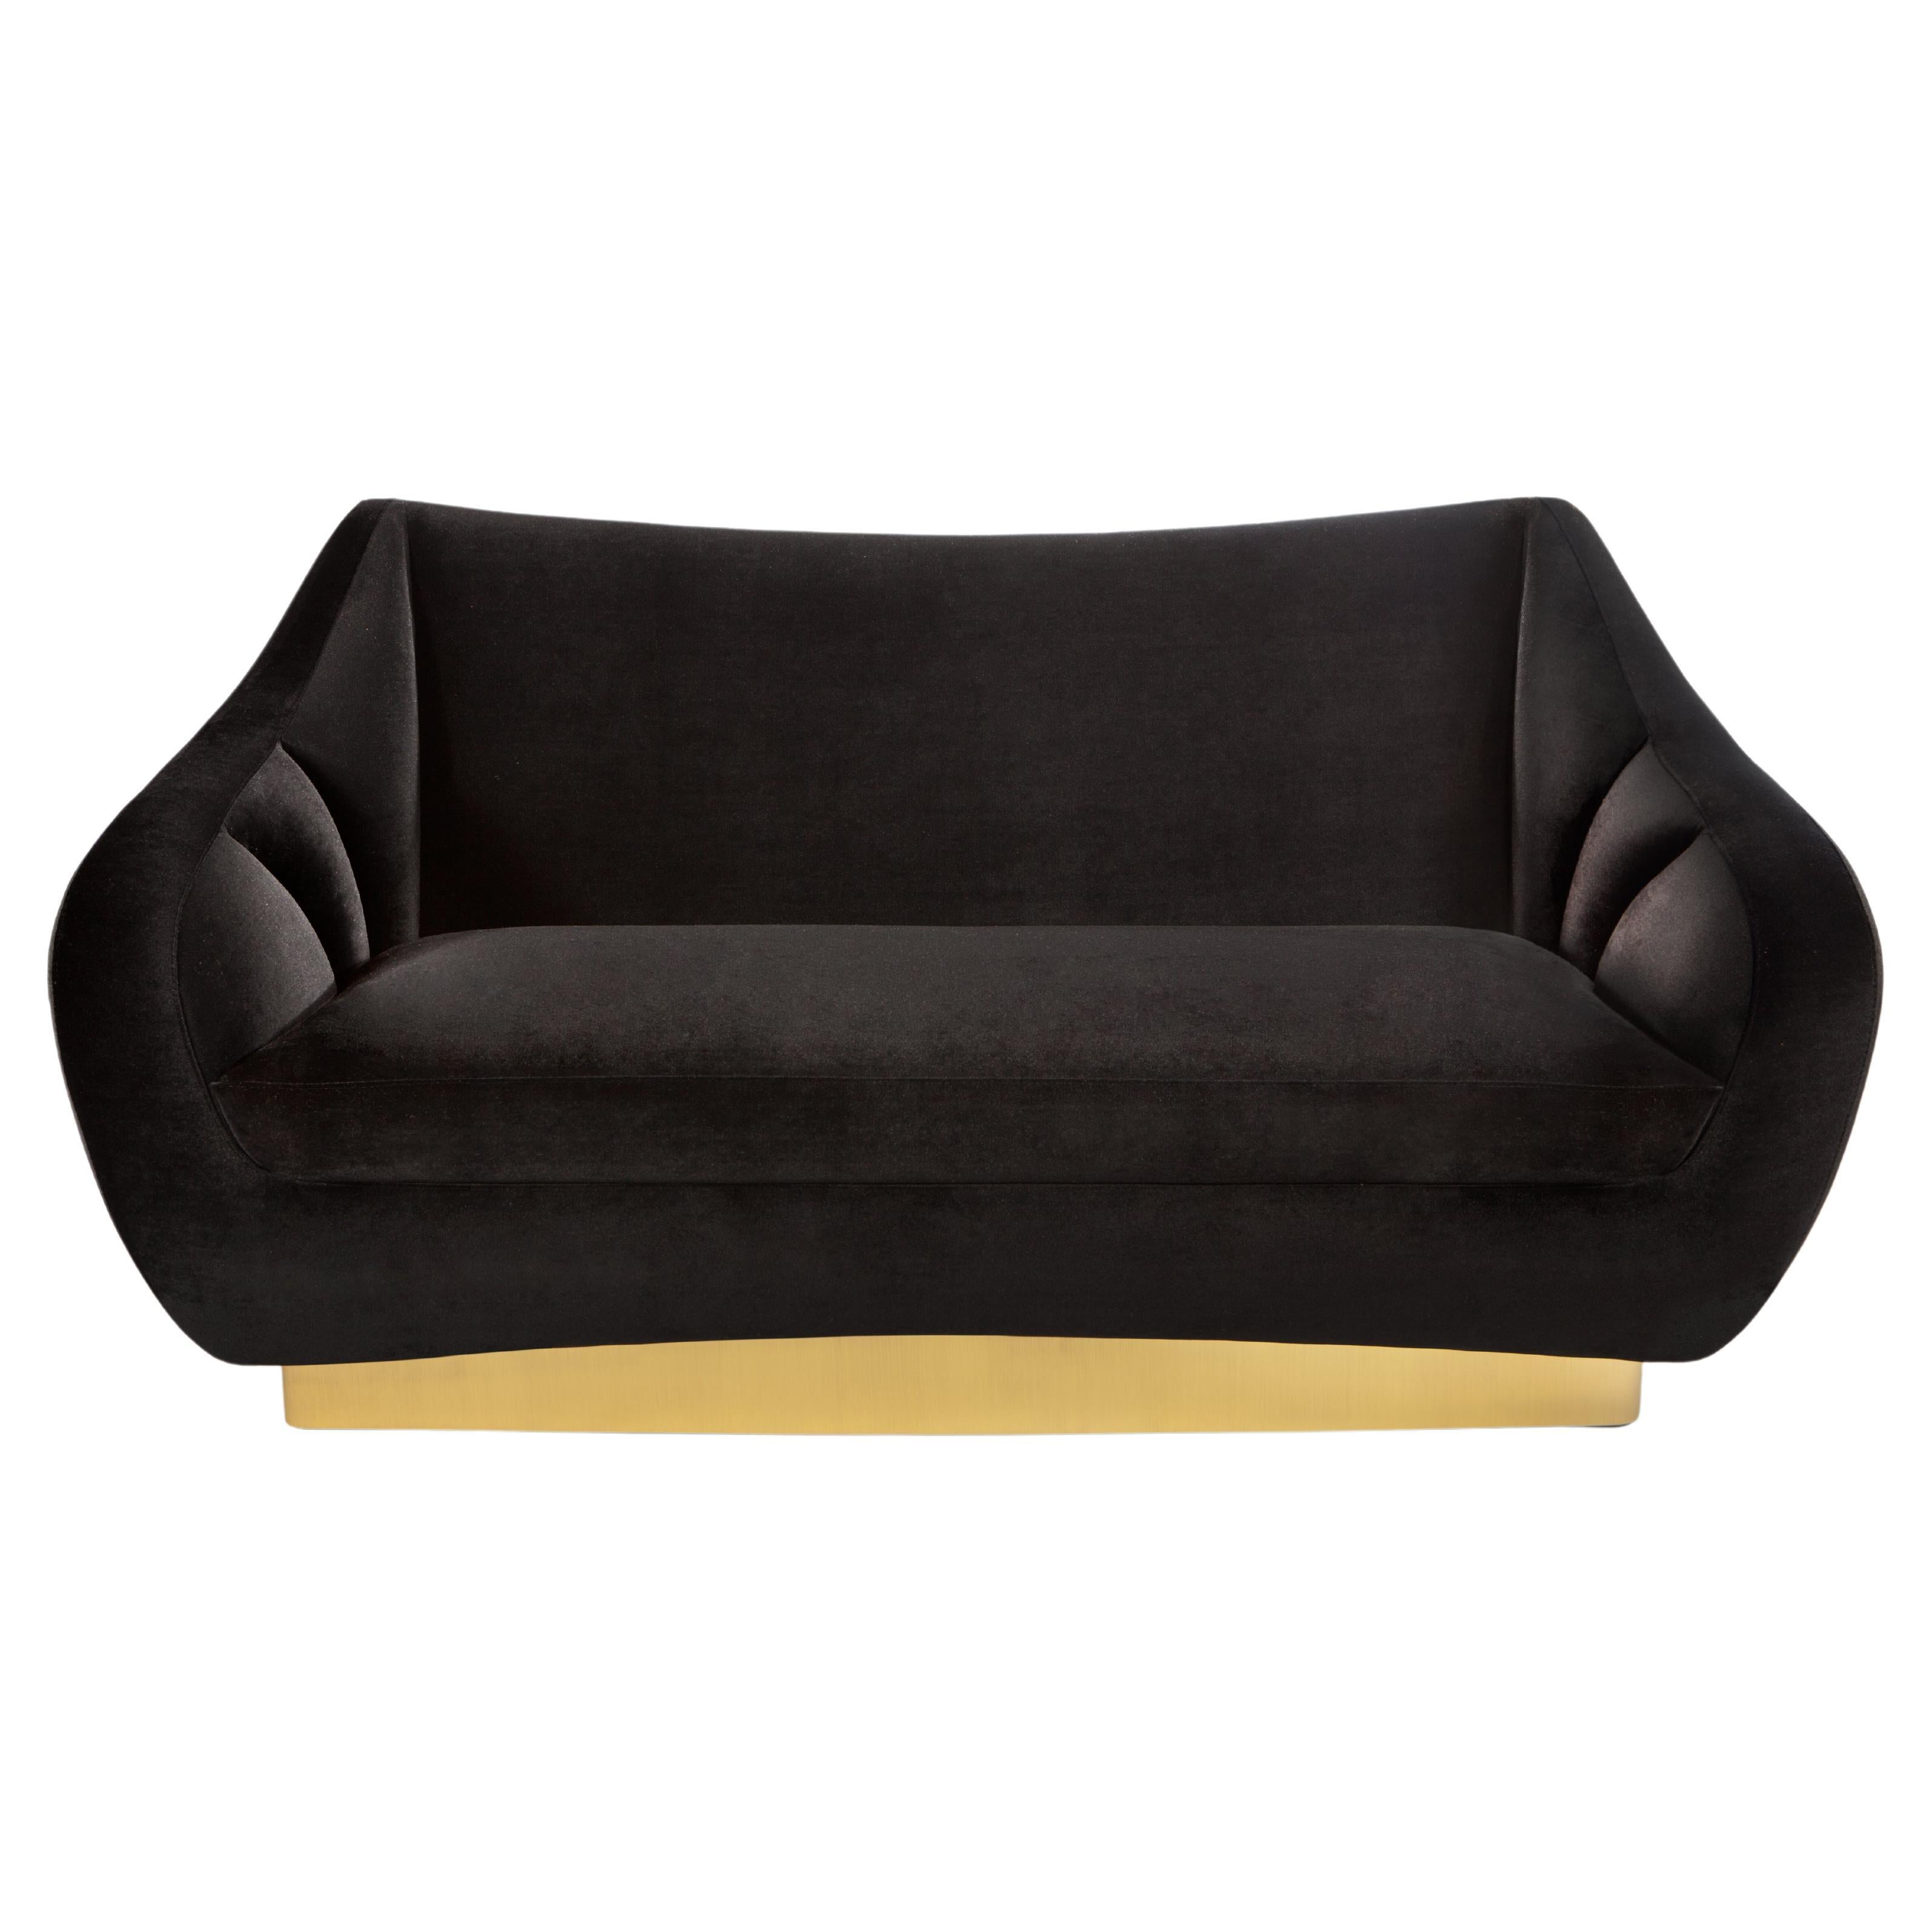 Figueroa 2 Seat Sofa by InsidherLand For Sale